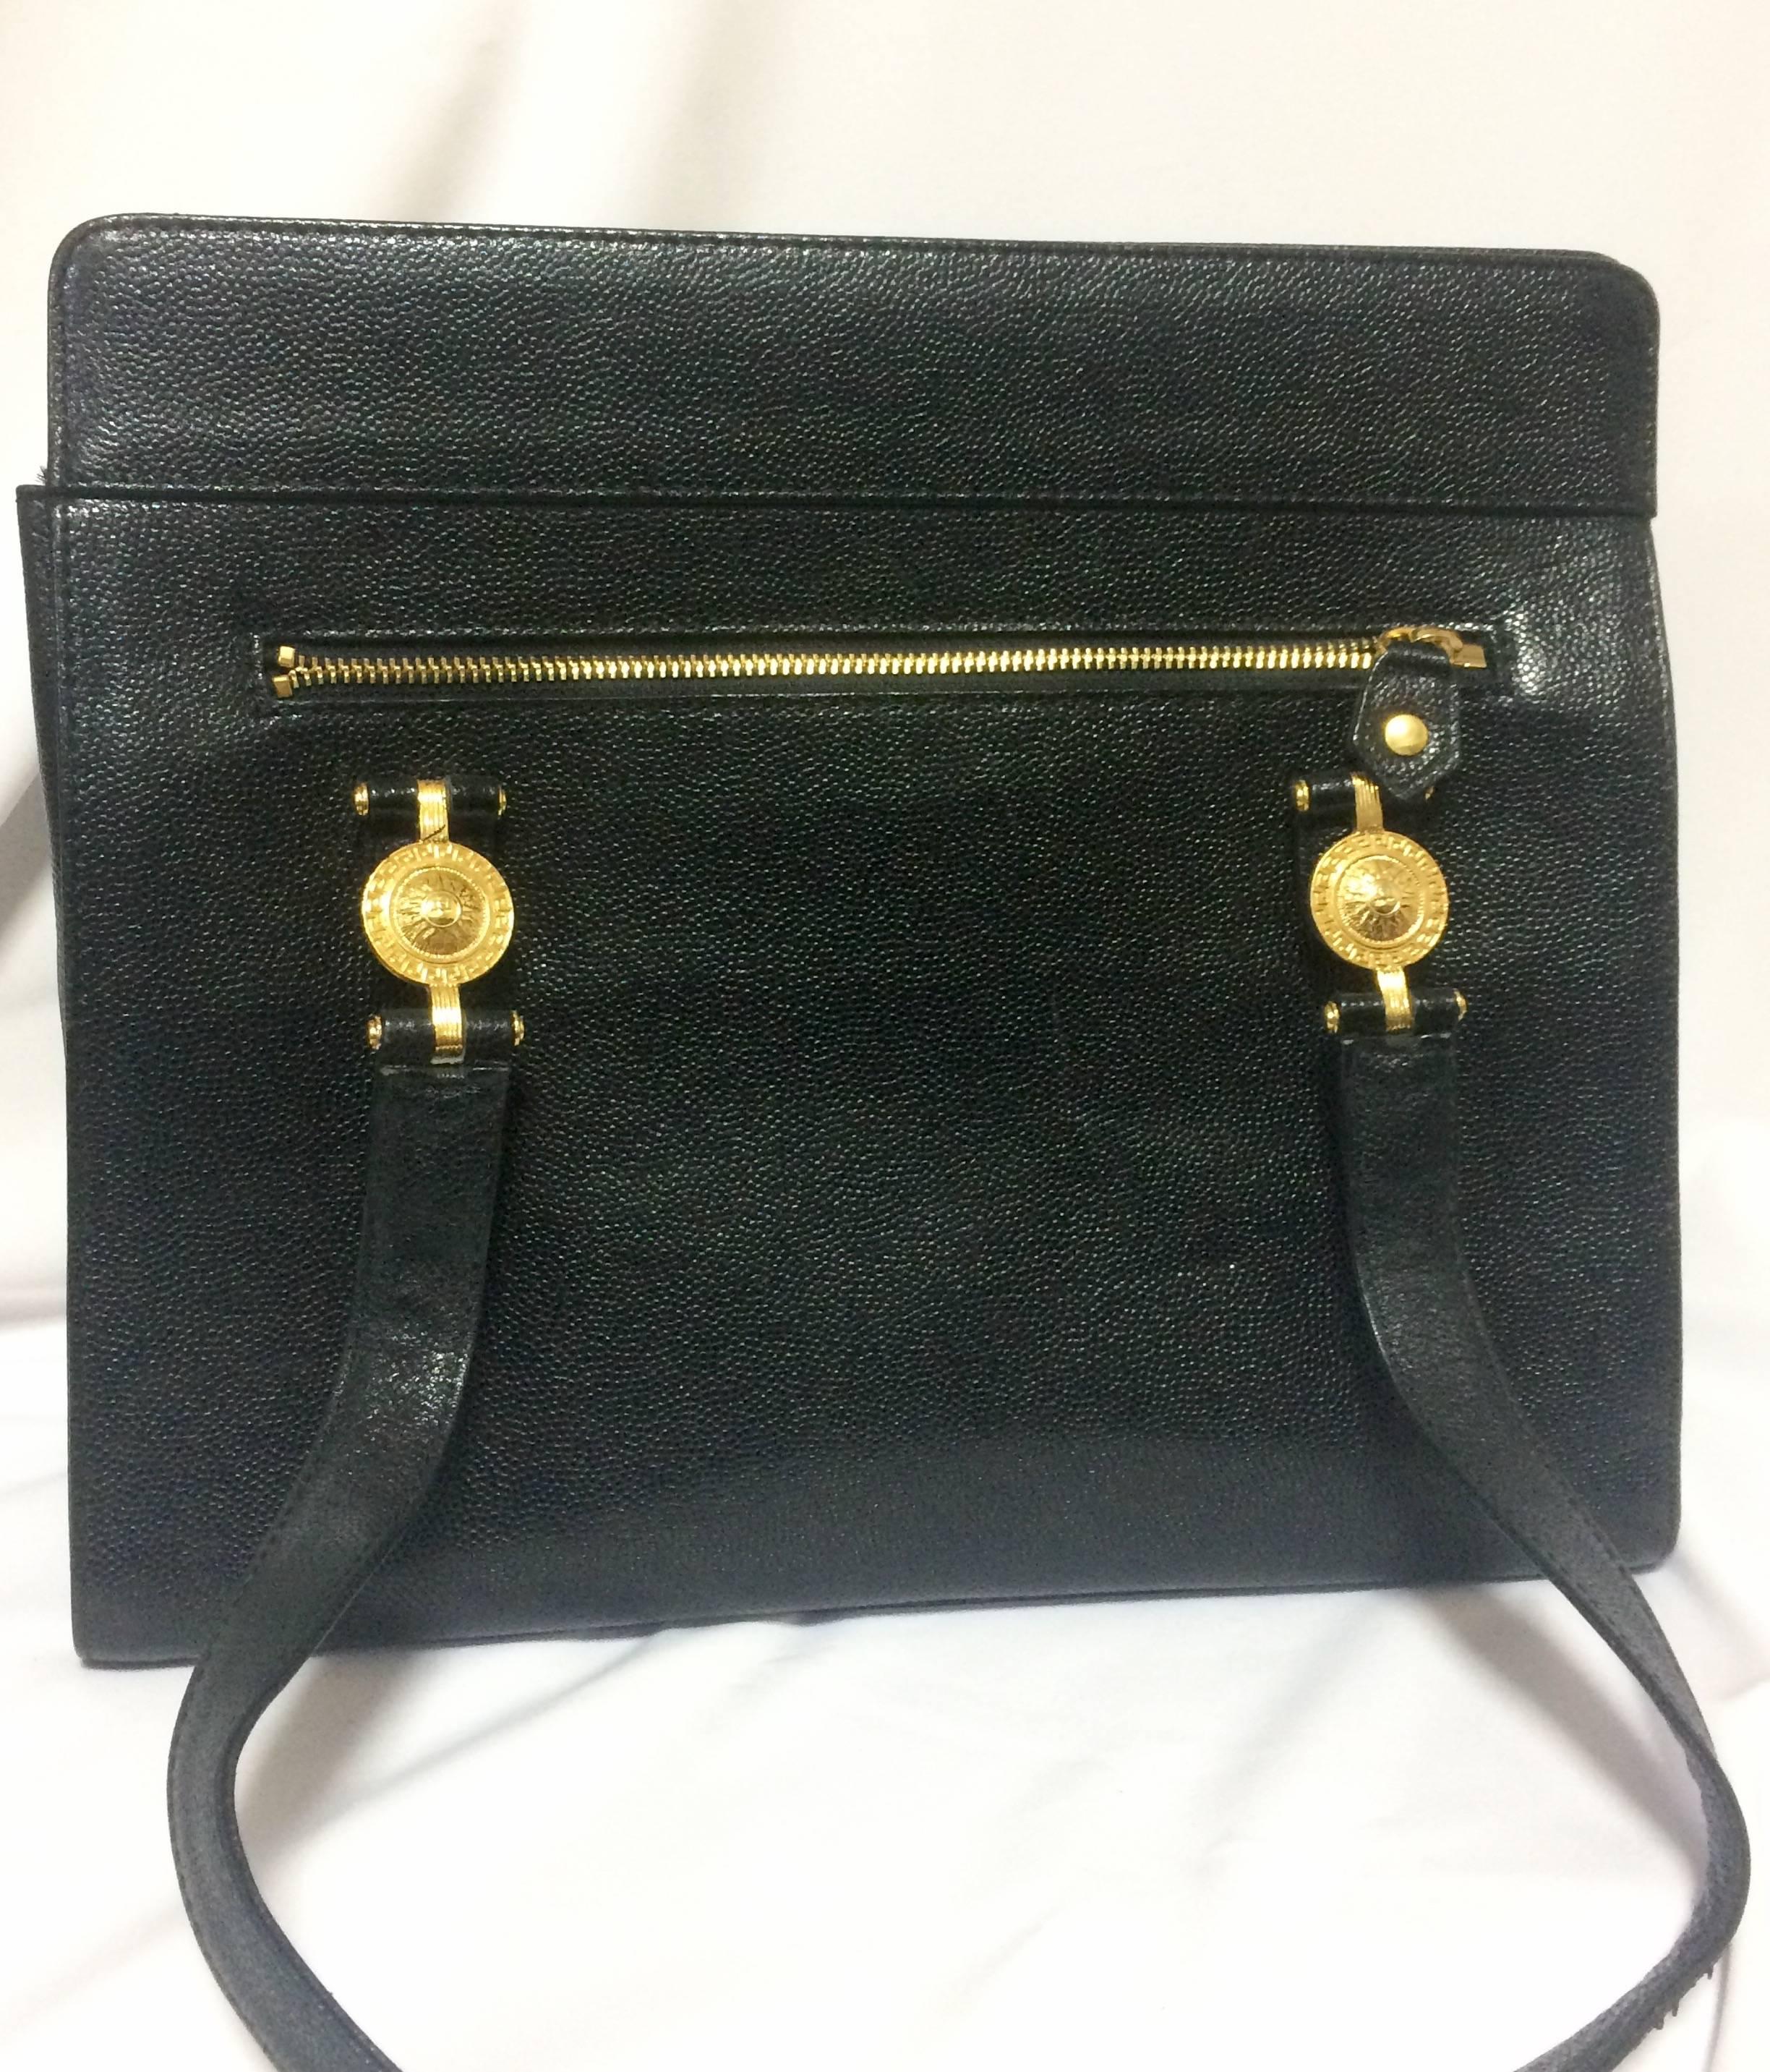 Vintage Gianni Versace black leather tote bag with golden sunburst motifs. In Good Condition For Sale In Kashiwa, Chiba